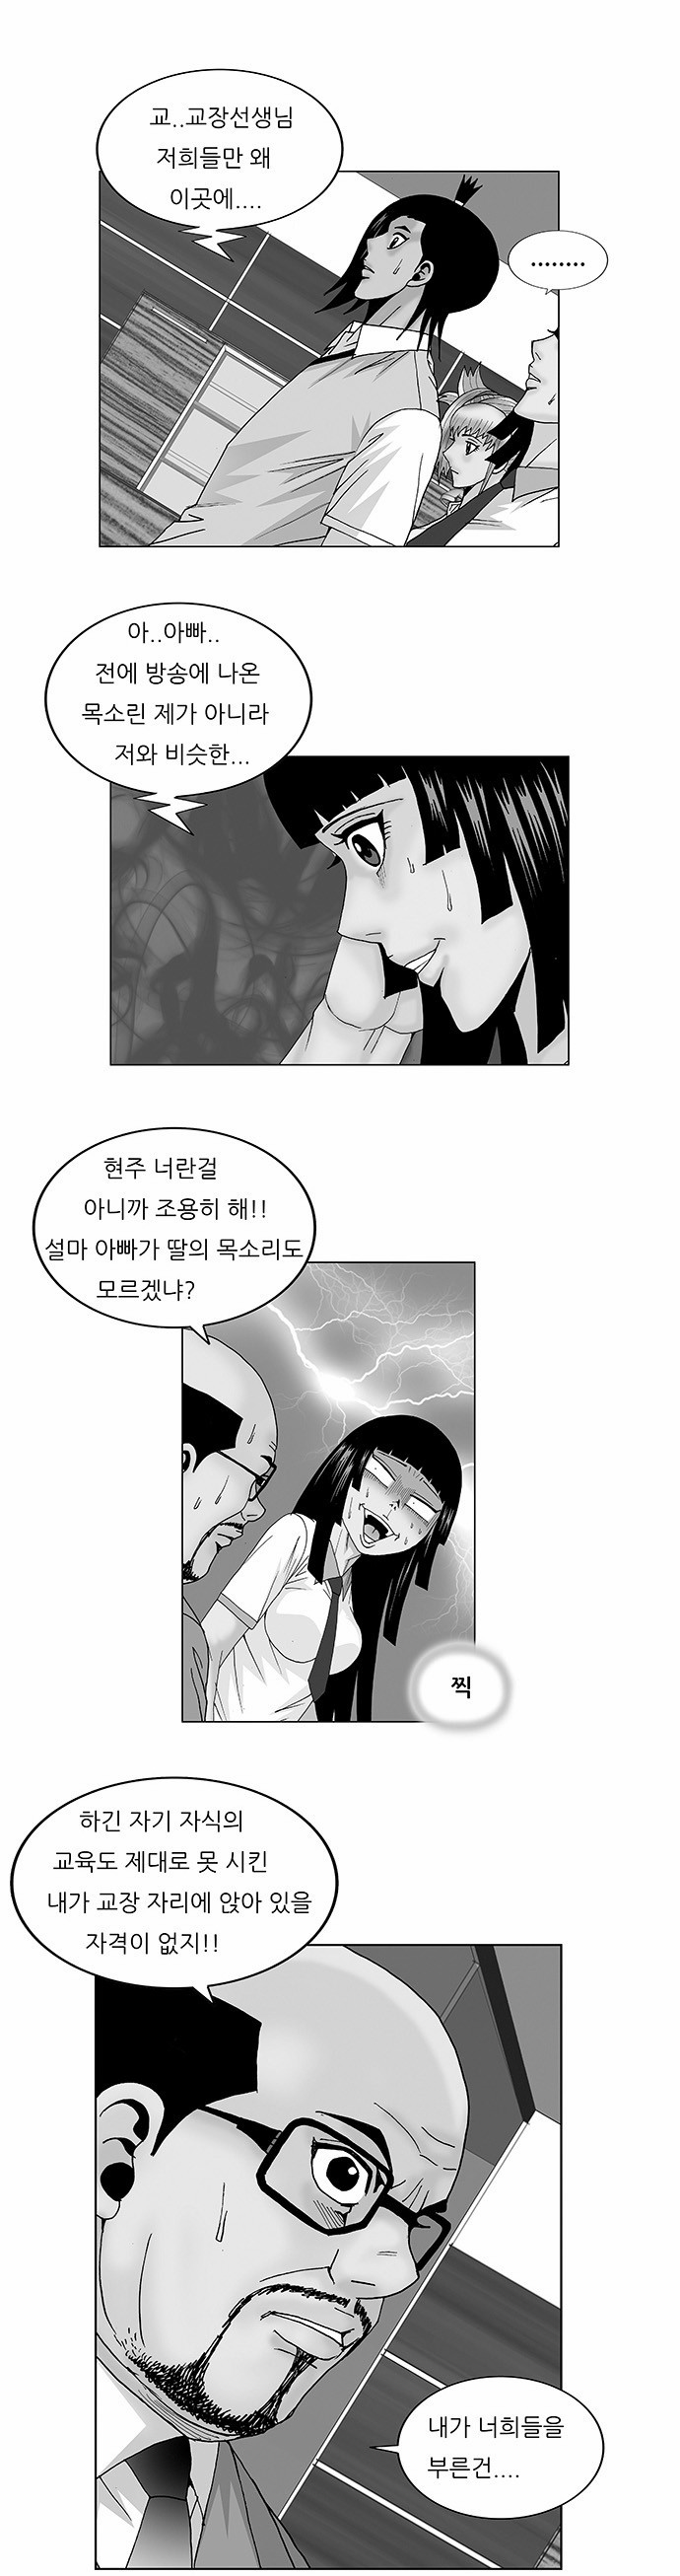 Ultimate Legend - Kang Hae Hyo - Chapter 112 - Page 1